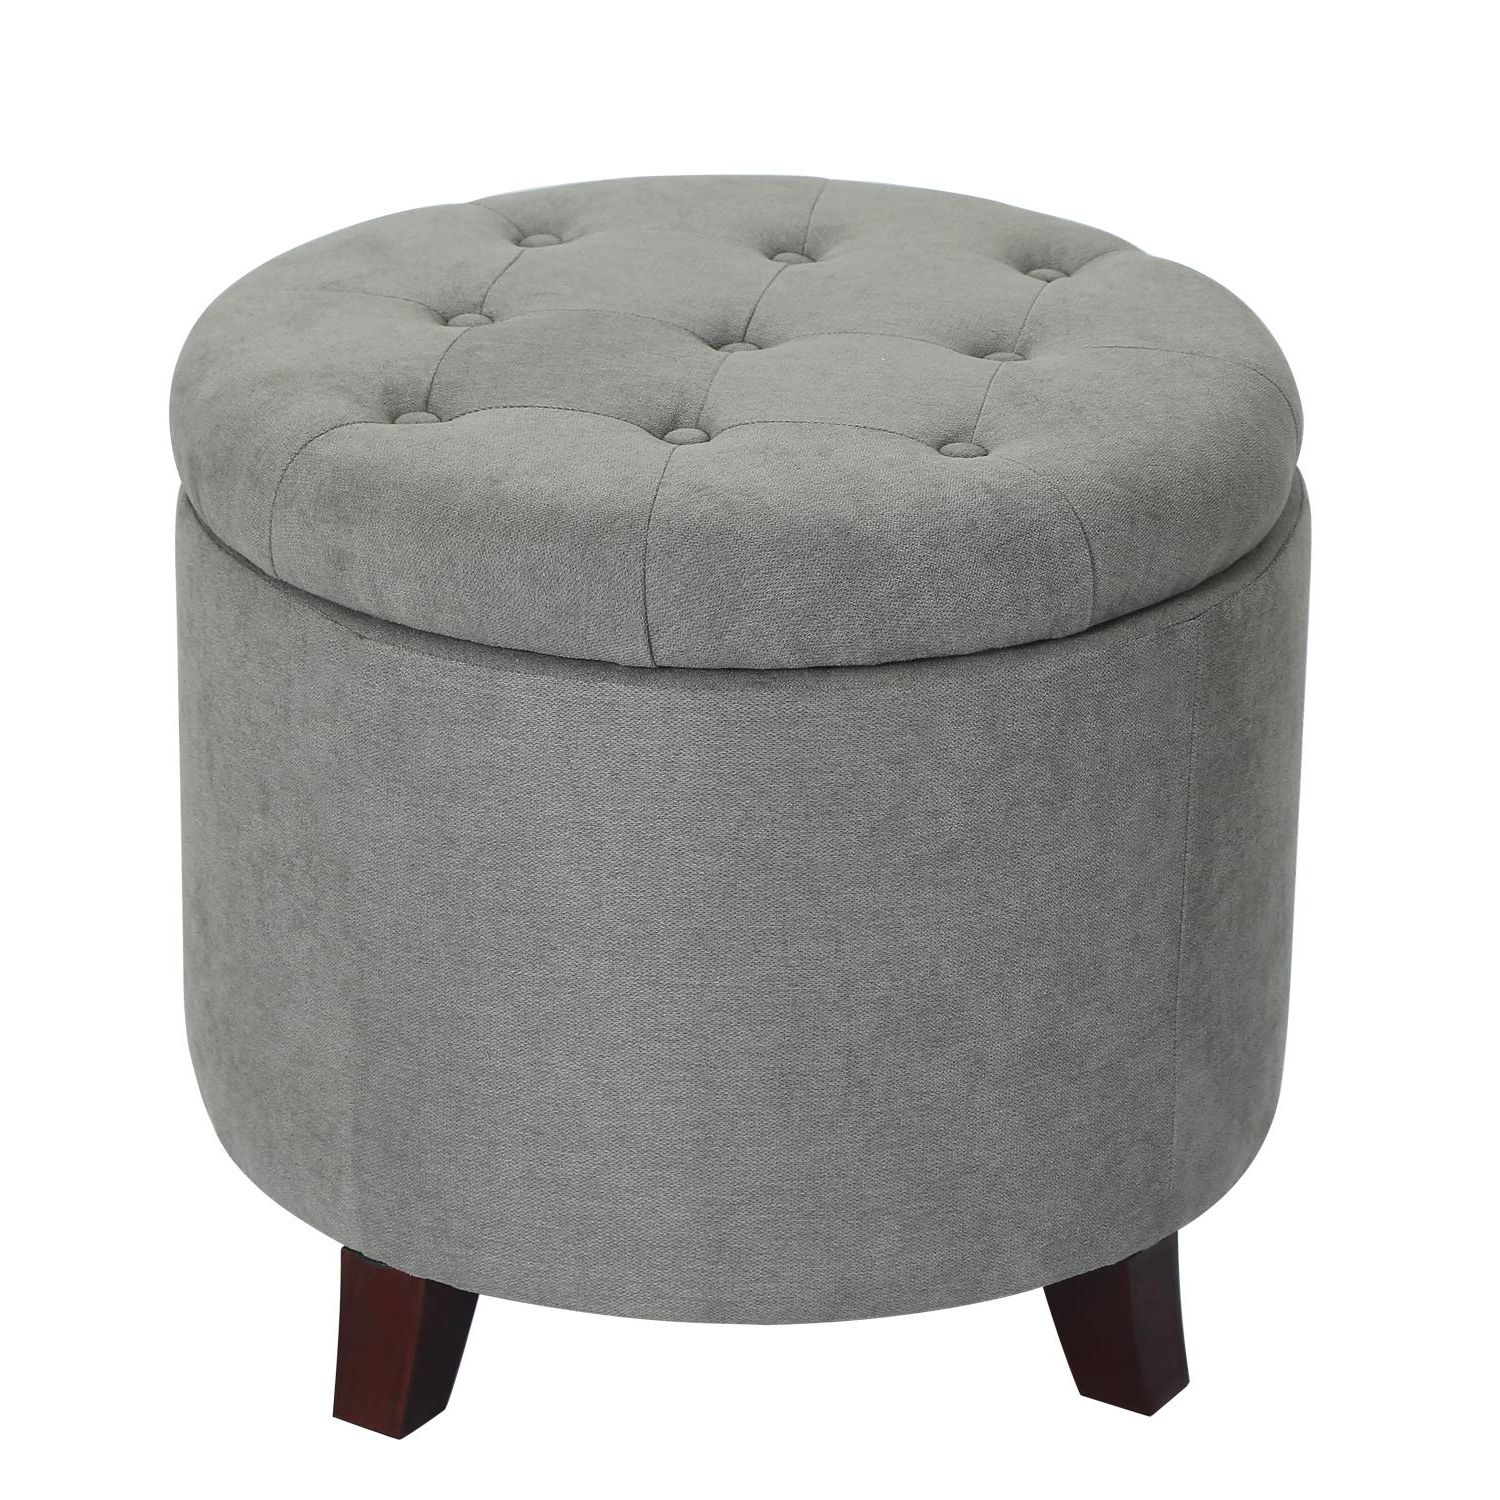 Most Recent Adeco Fabric Cushion Round Button Tufted Lift Top Storage Ottoman Intended For Charcoal Fabric Tufted Storage Ottomans (View 8 of 10)